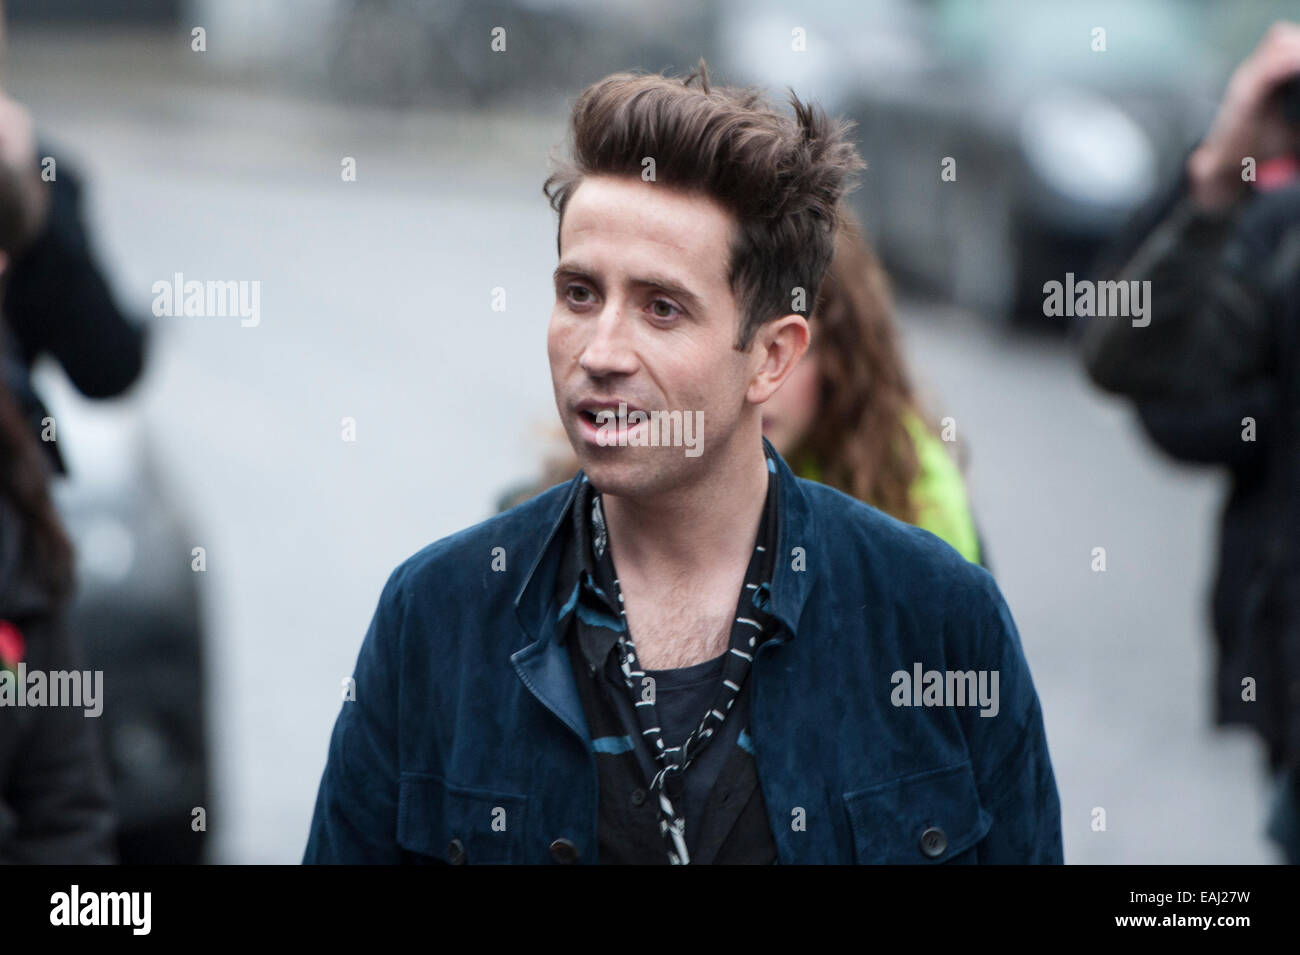 Basing Street, London, UK. 15th November 2014. Artists arrive at Sarm Studios in Notting Hill, west London, to record Band Aid. Pictured: Nick Grimshaw. Credit:  Lee Thomas/Alamy Live News Stock Photo